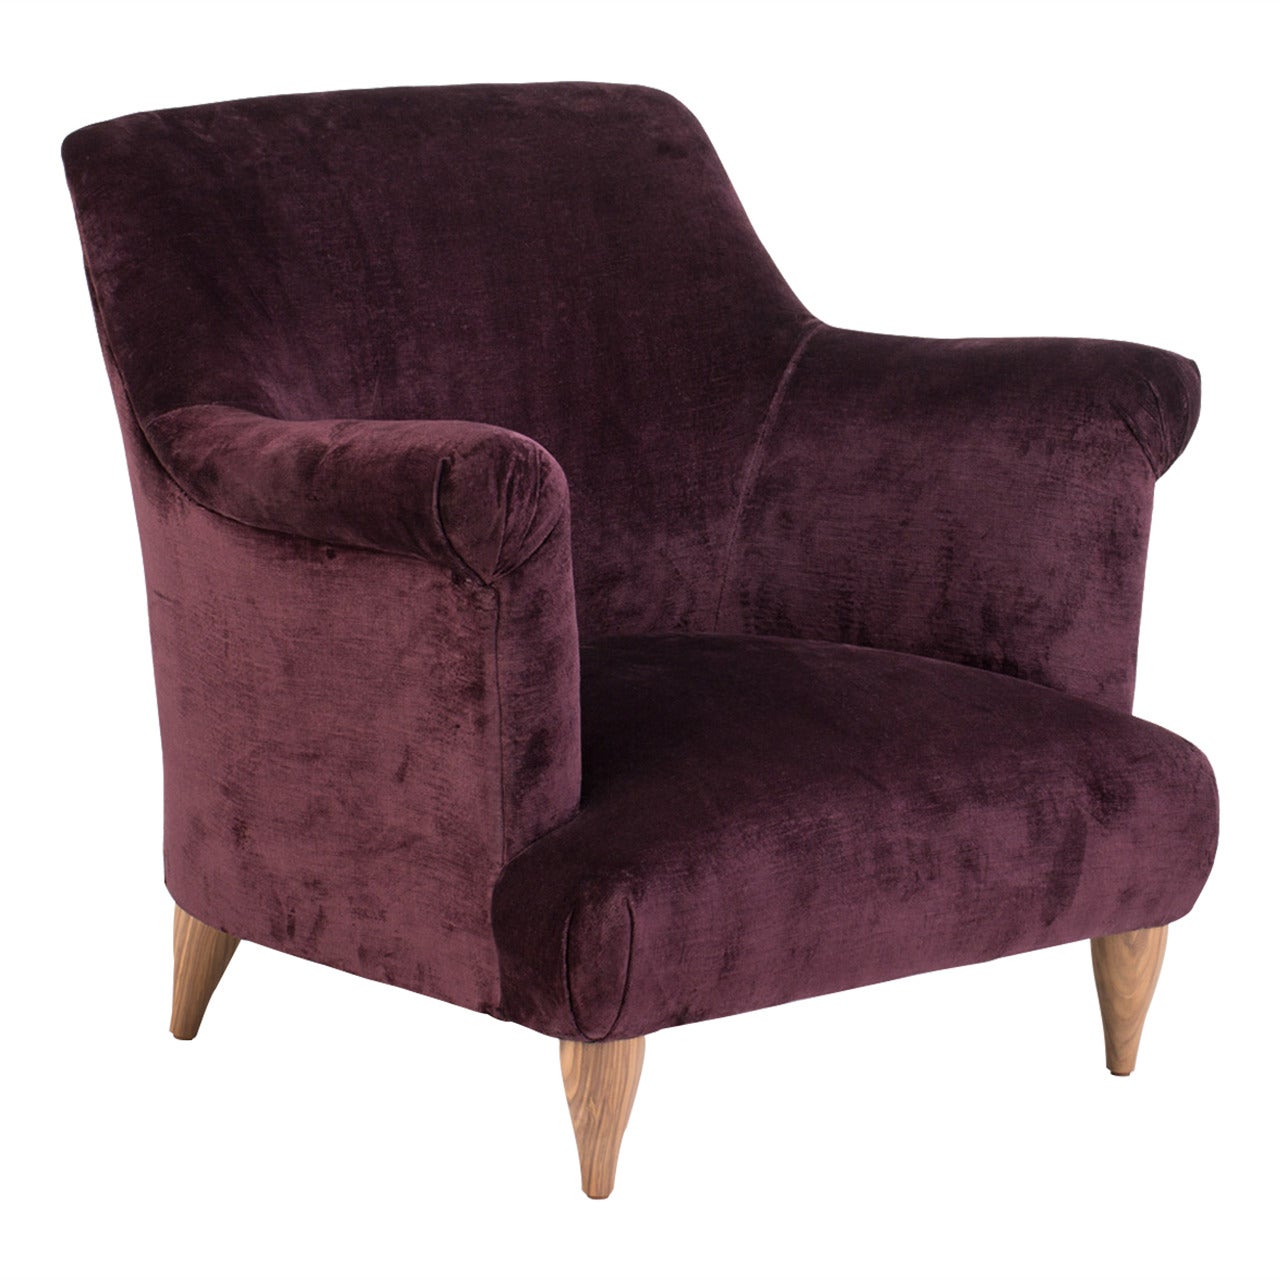 Russell Pinch for The Future Perfect Goddard Armchair, Aubergine Linen Velvet For Sale